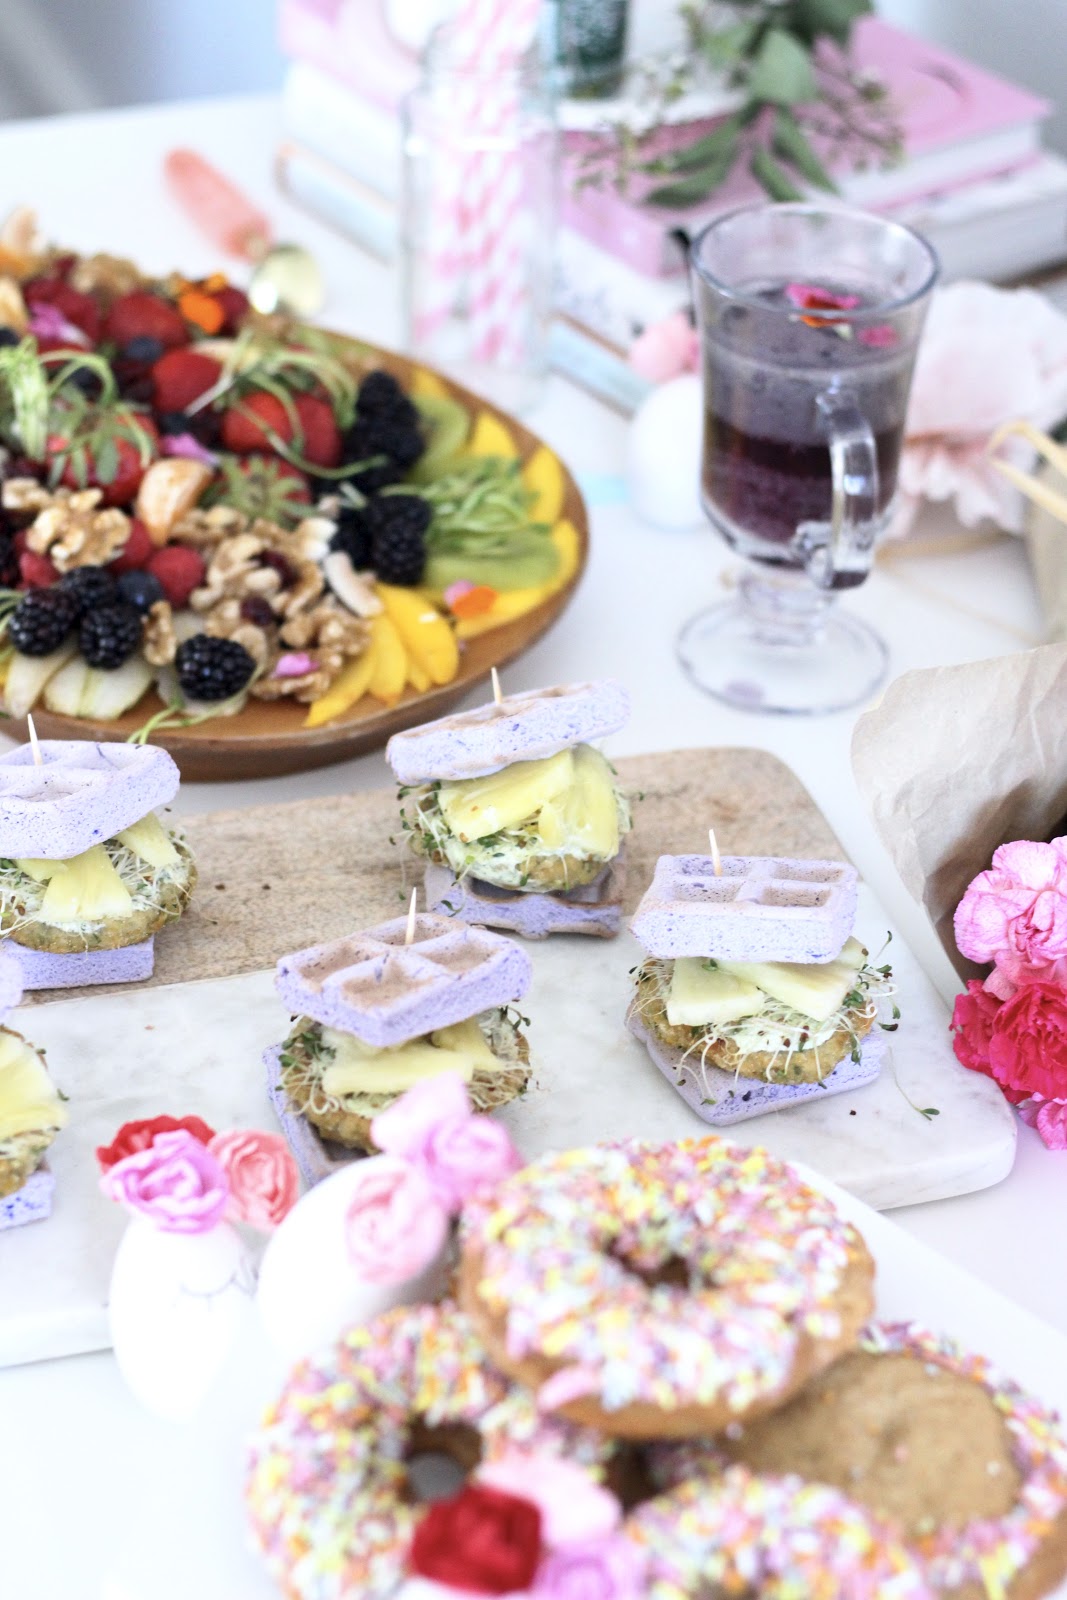 Pastels and Pastries- Easy Easter Entertaining / Easter Table Kelly's Bake Shoppe Sprinkle cookies & donuts/ The Burger Pawty Dream Burger